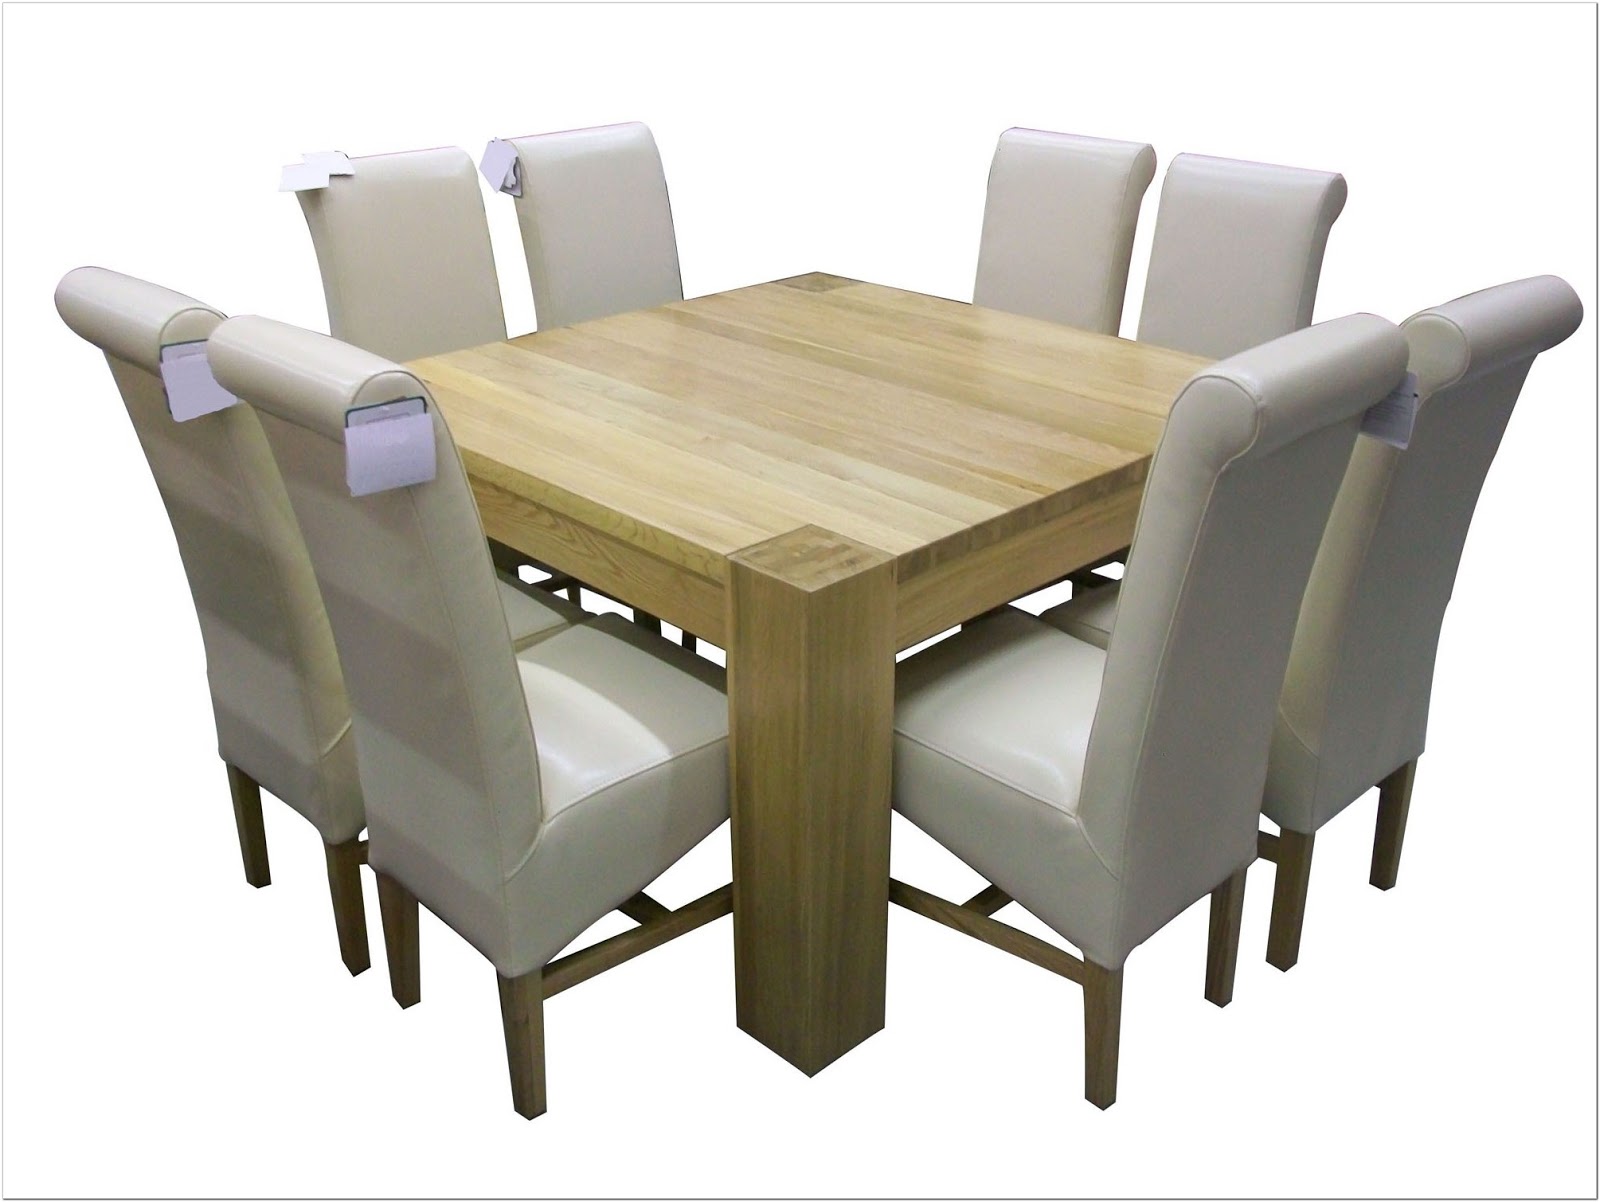 8 Seater Square Dining Table Designs